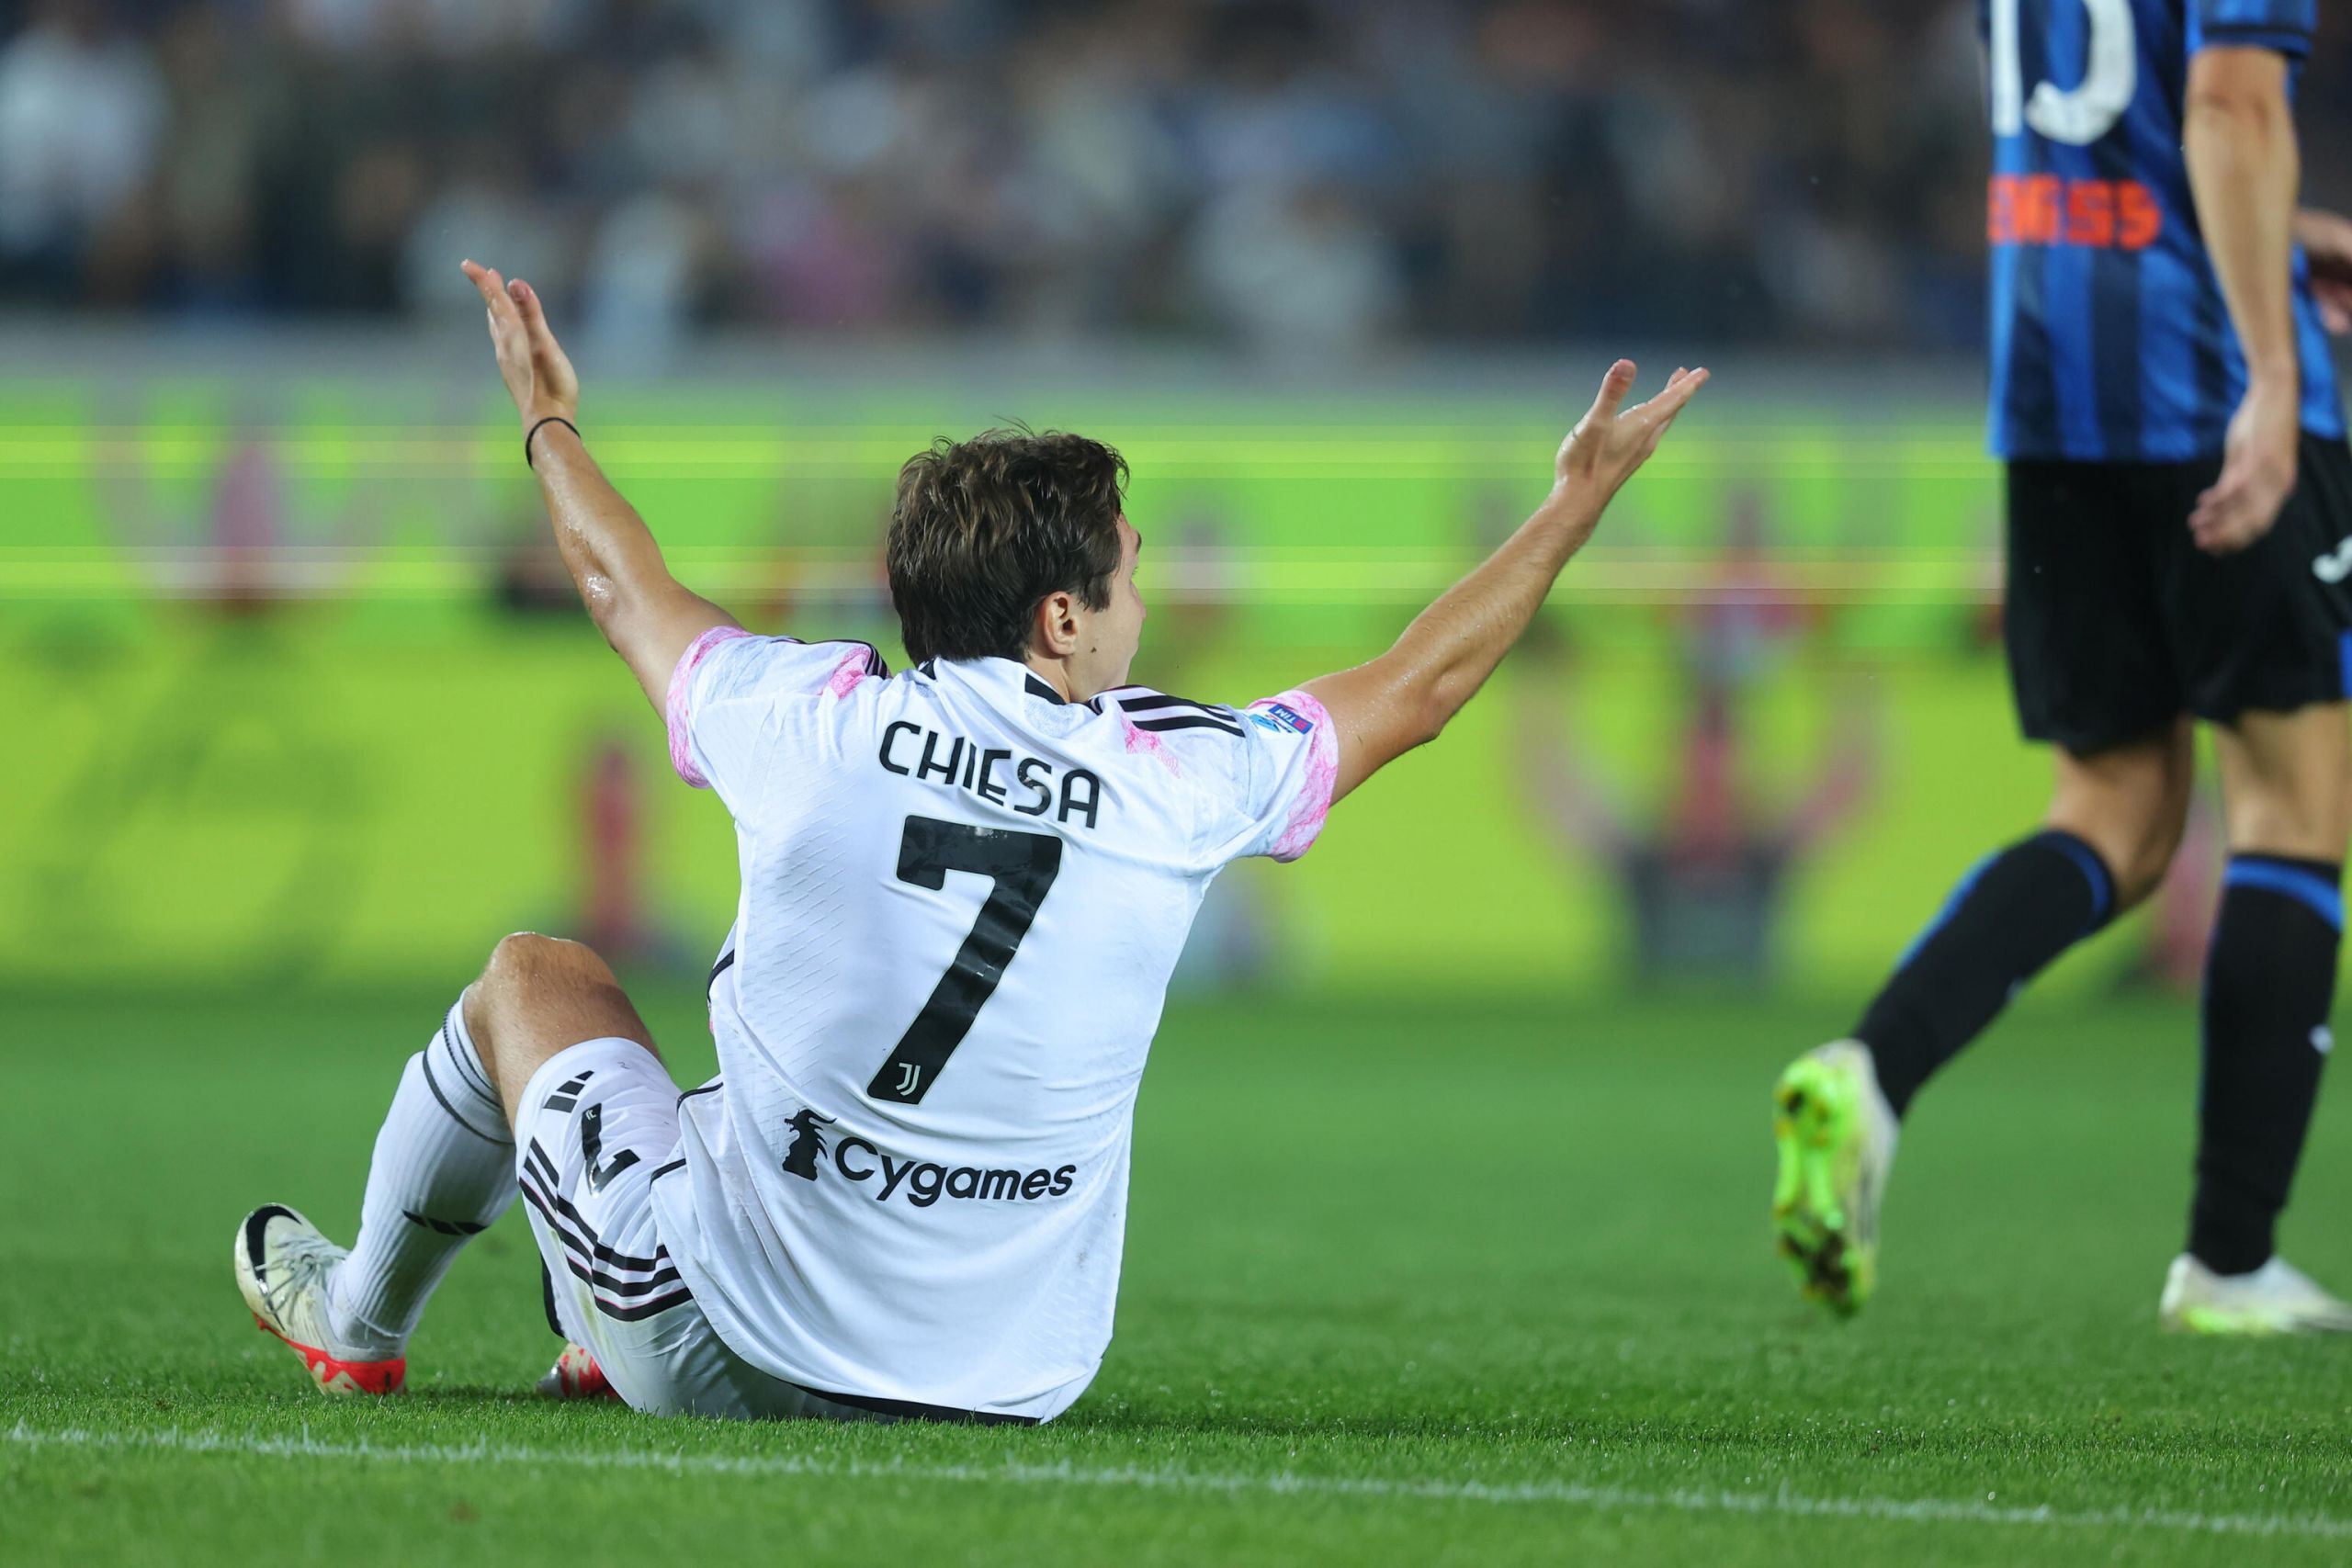 Juventus struggled to create chances against Atalanta. Juan Musso was challenged only by a shot by Federico Chiesa in the second half.